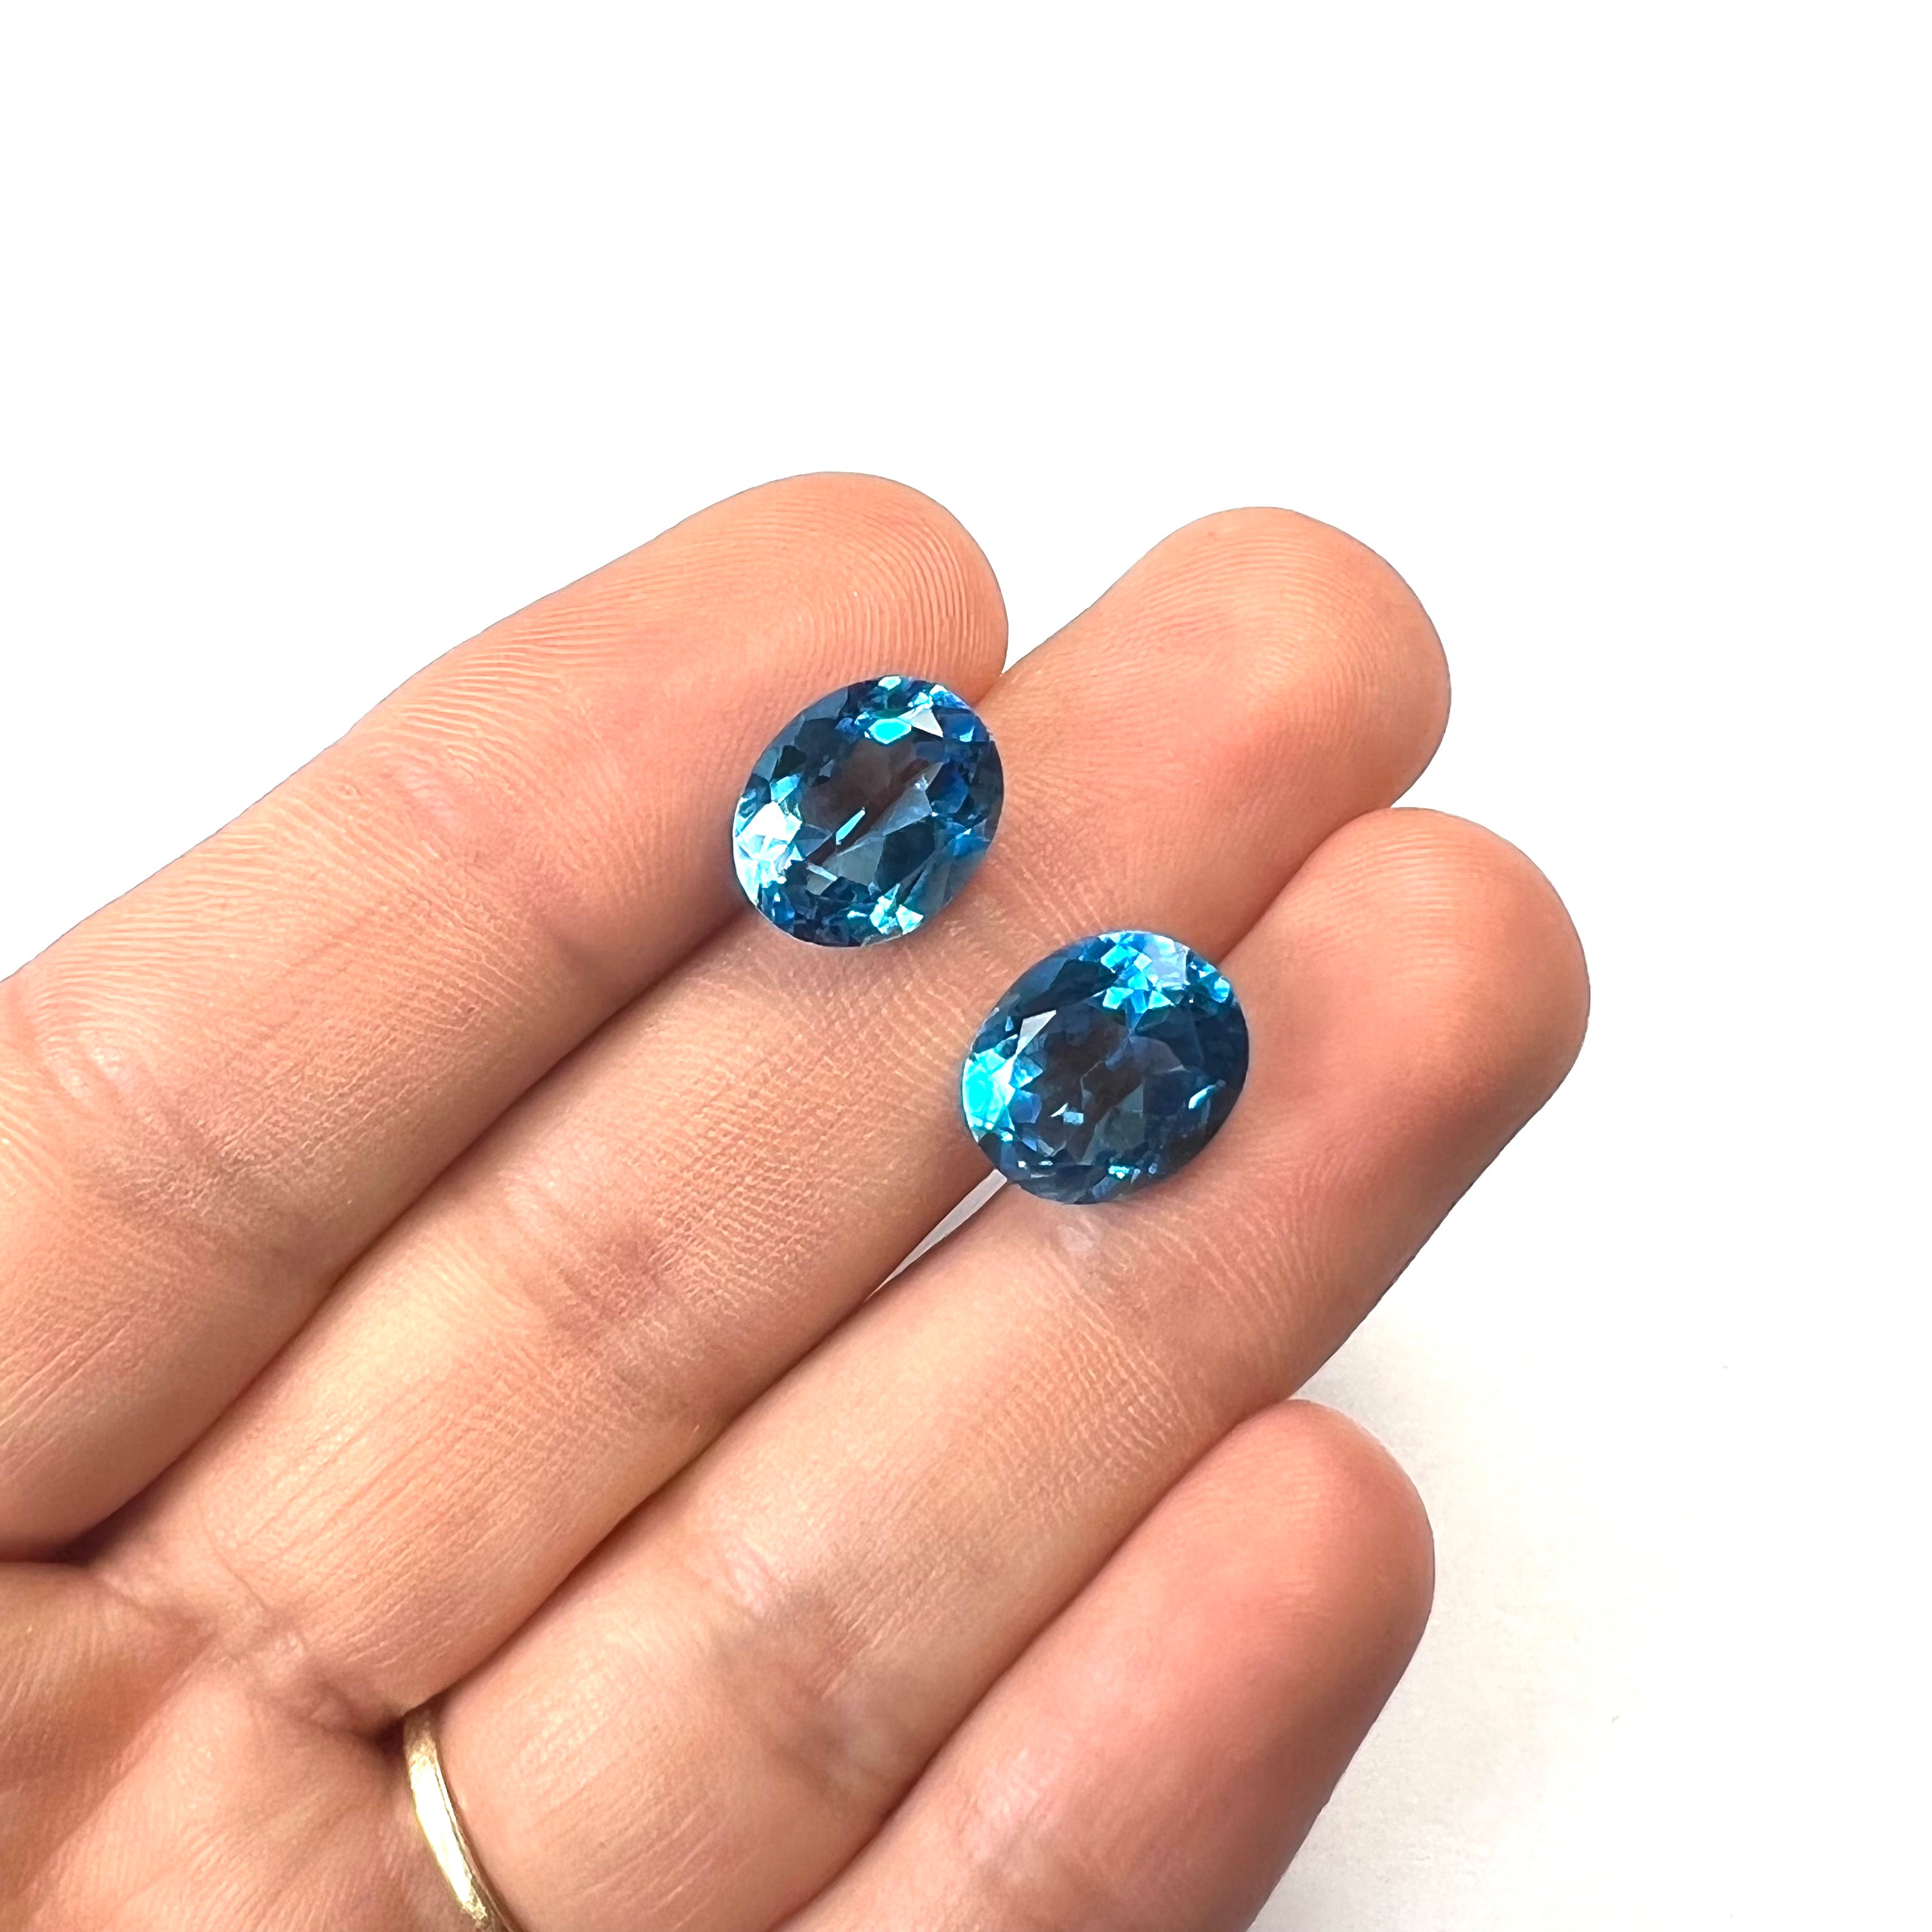 11.48CTW Pair of Loose Natural Oval Cut Topaz 12x10x6.4mm Earth mined Gemstone